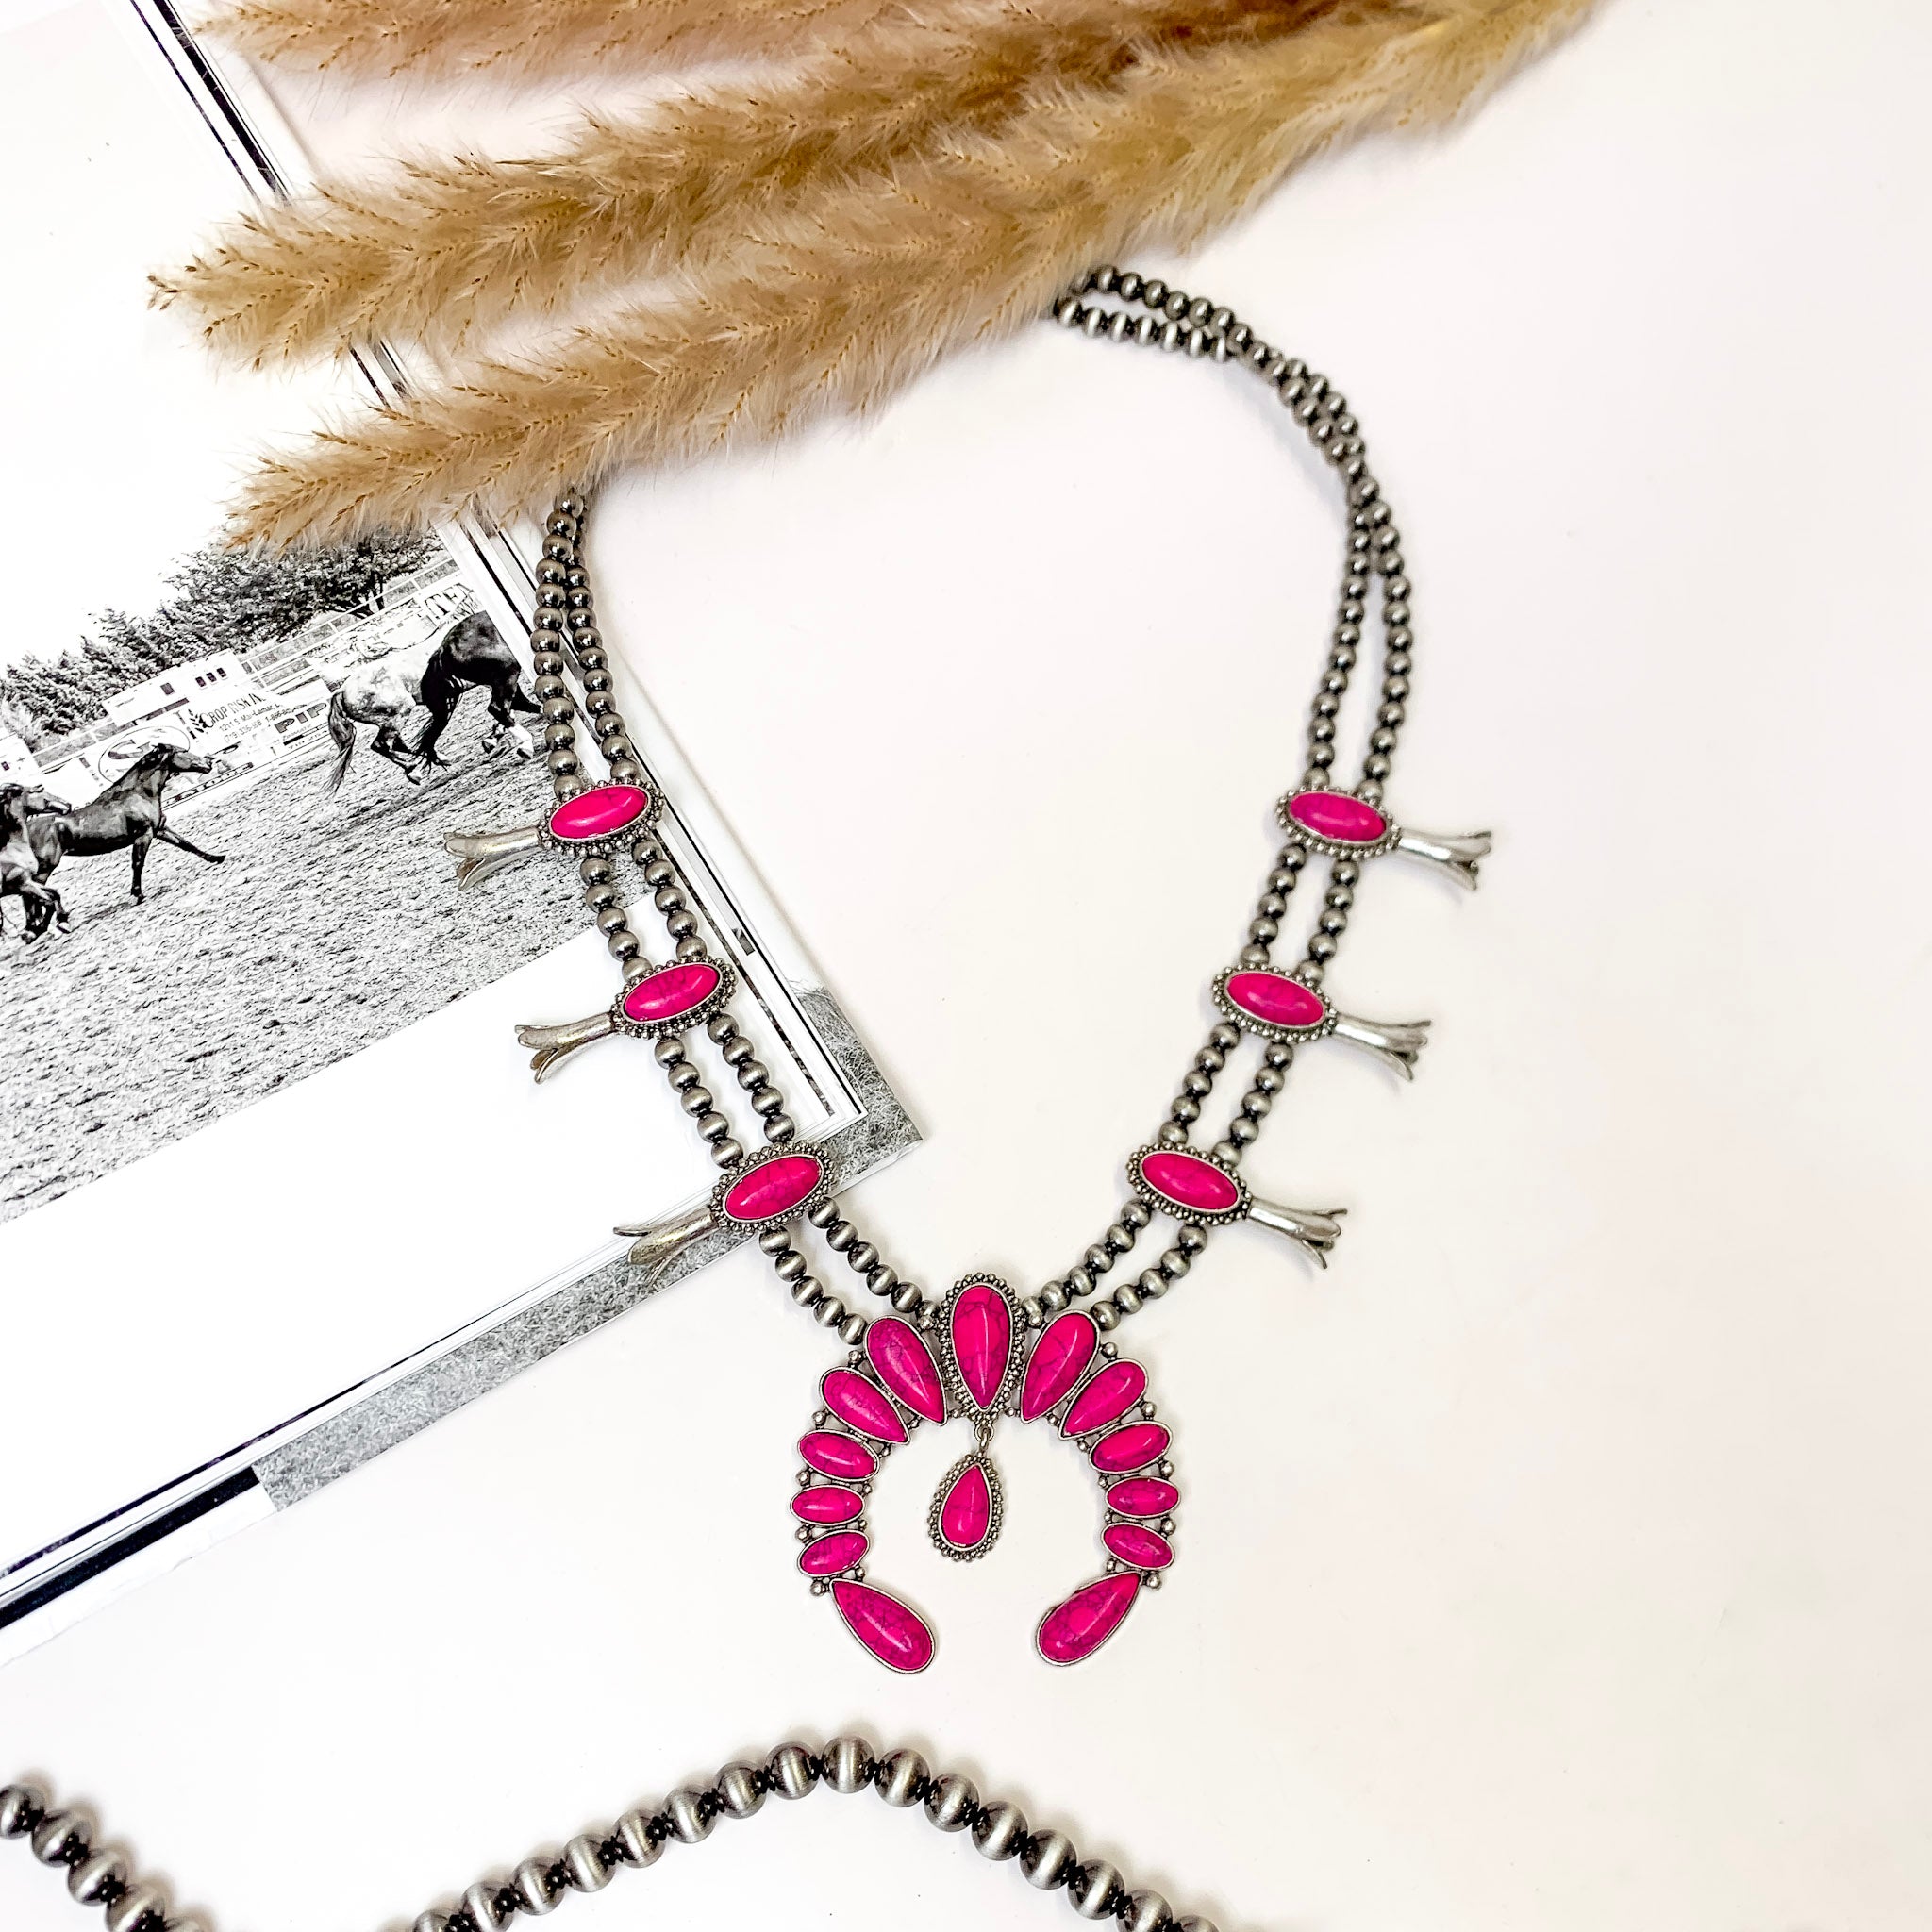 She's Gone Country Squash Blossom Necklace with Naja Pendant and Faux Stone Dangle in Fushcia Pink